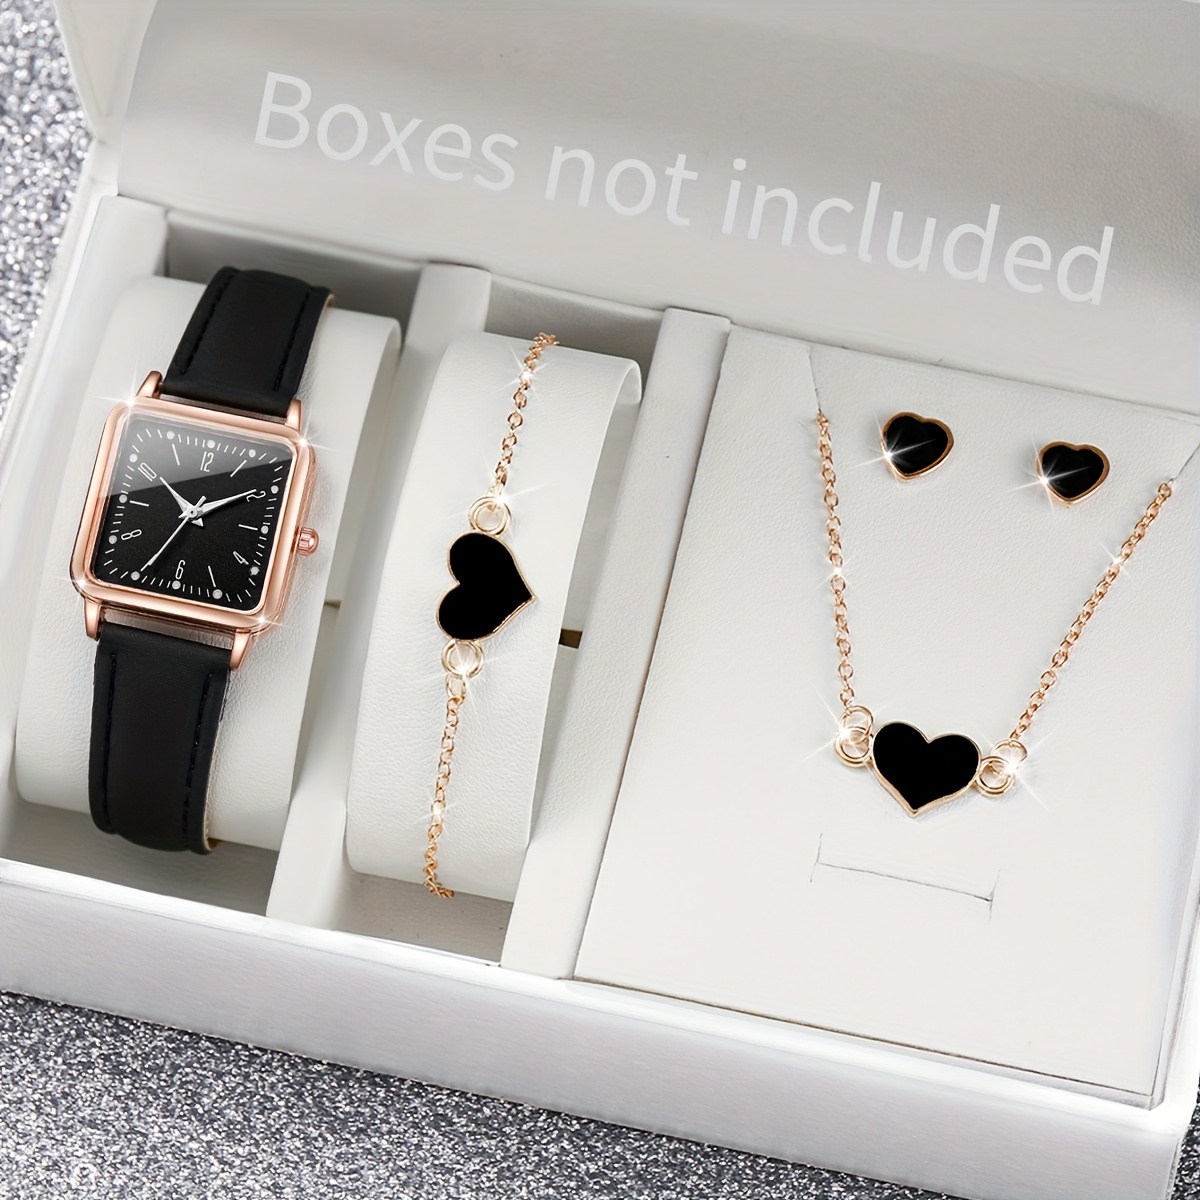 

5pcs/set Women's Casual Square Quartz Watch Analog Pu Leather Wrist Watch & Heart Jewelry Set, Valentine's Day Gift For Her